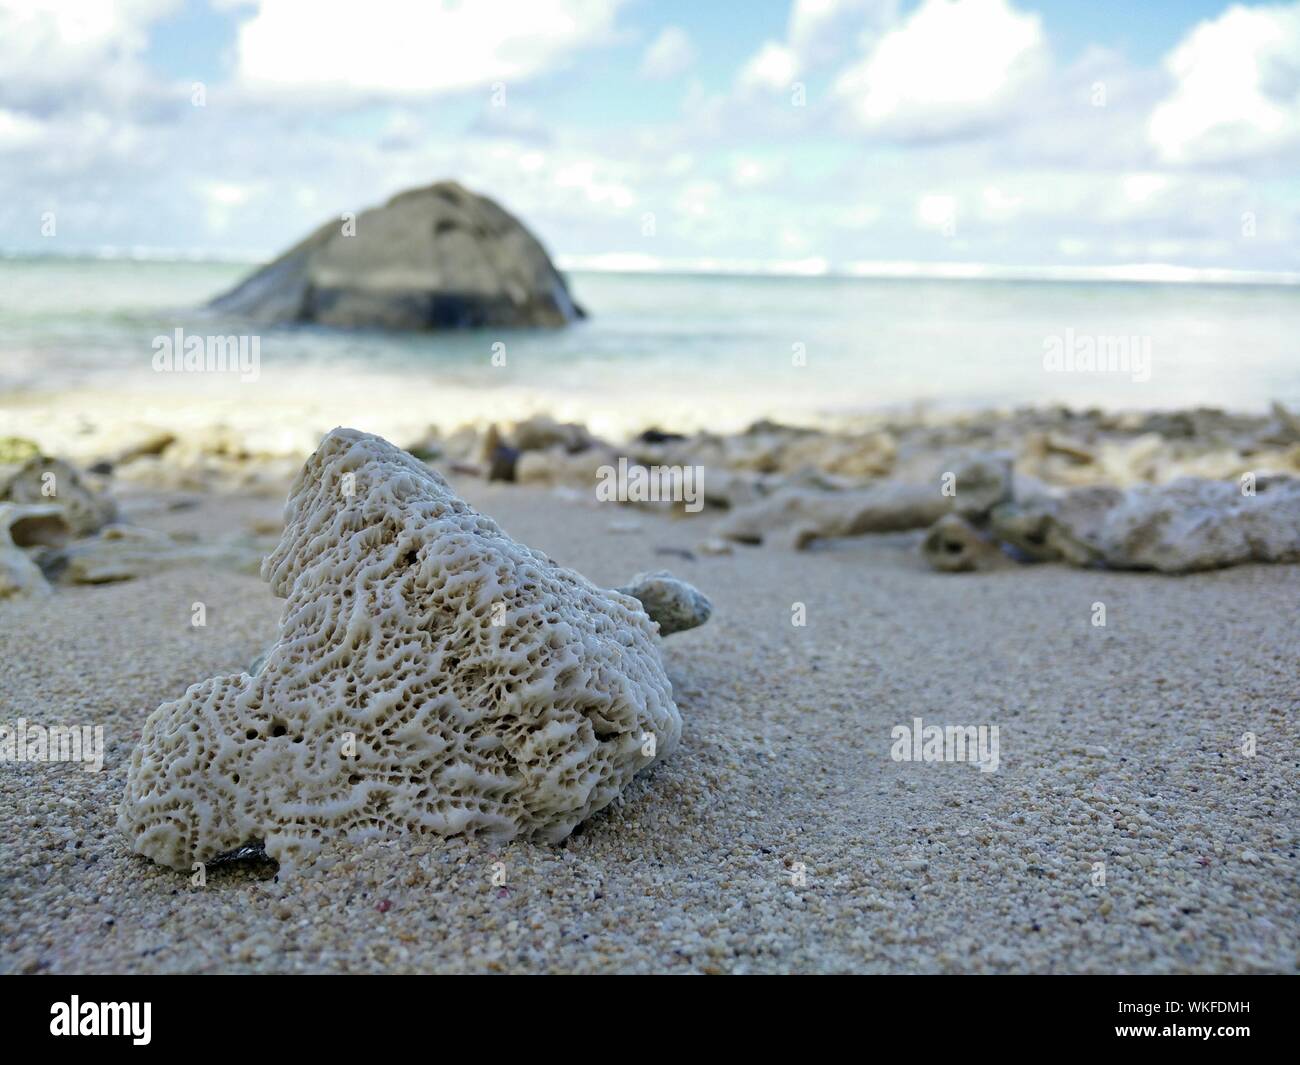 Coral Reef On Shore Against Cloudy Sky Stock Photo